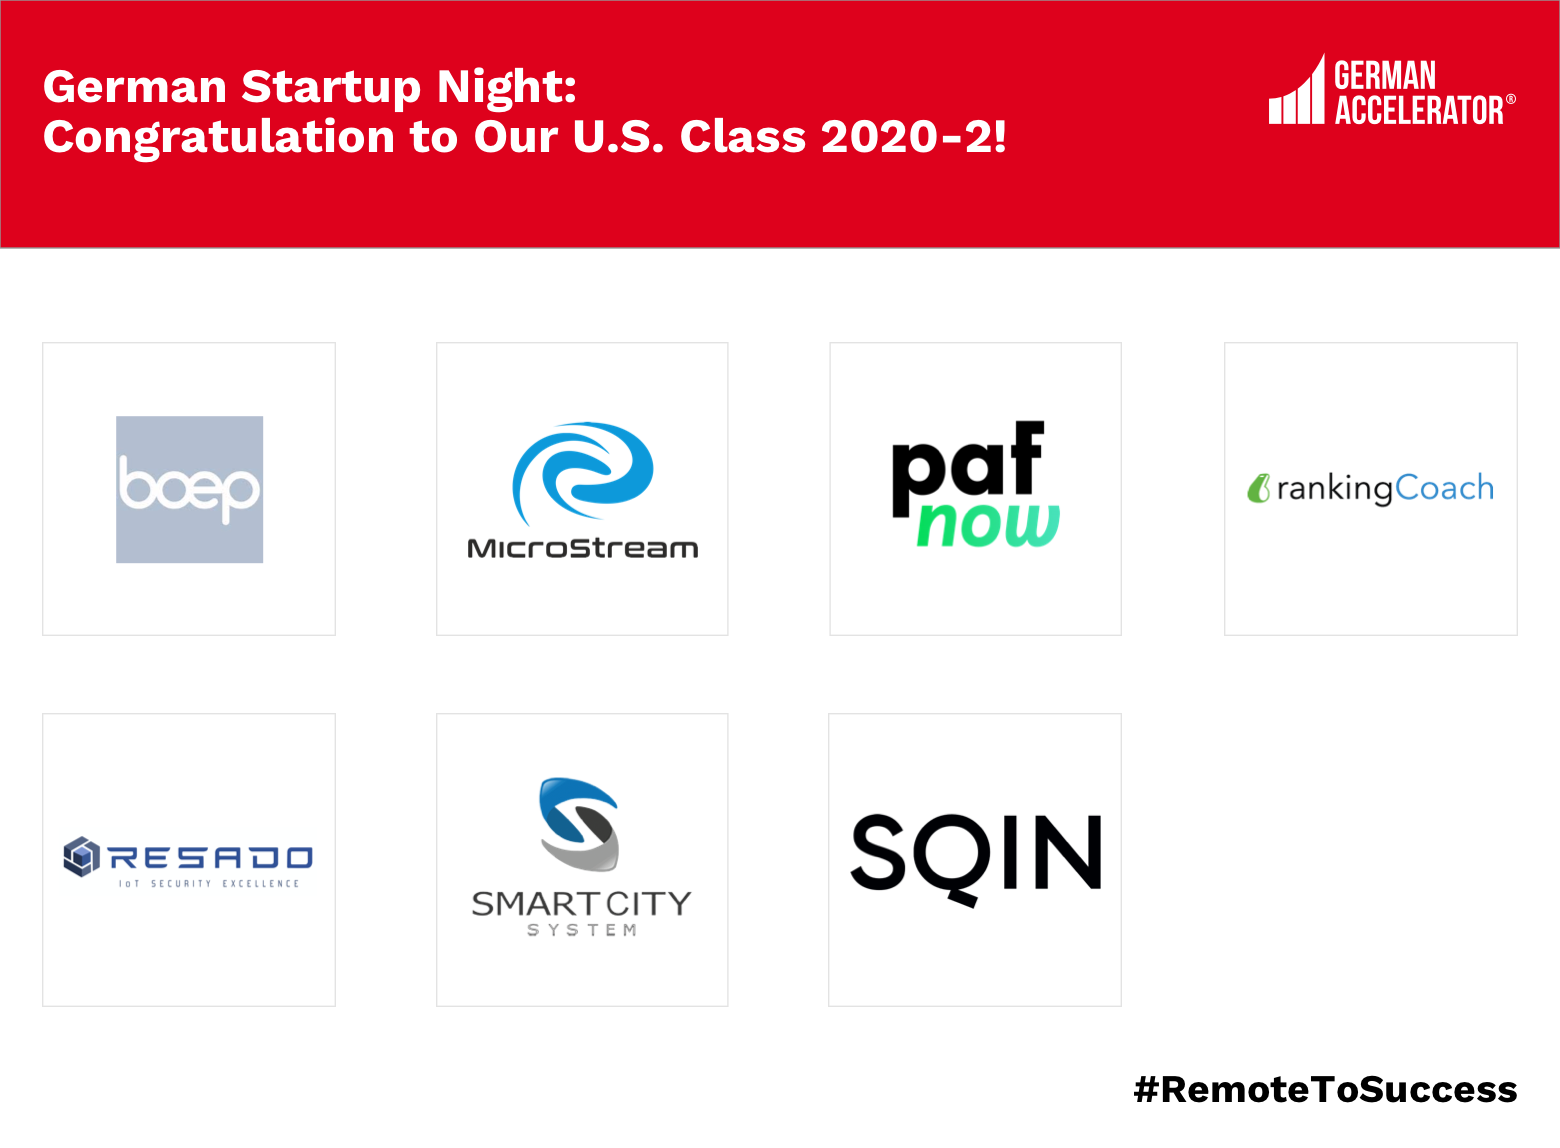 Ready. Set. Pitch! Impressions From Our Very First Joint & Fully Virtual New York & Silicon Valley German Startup Night